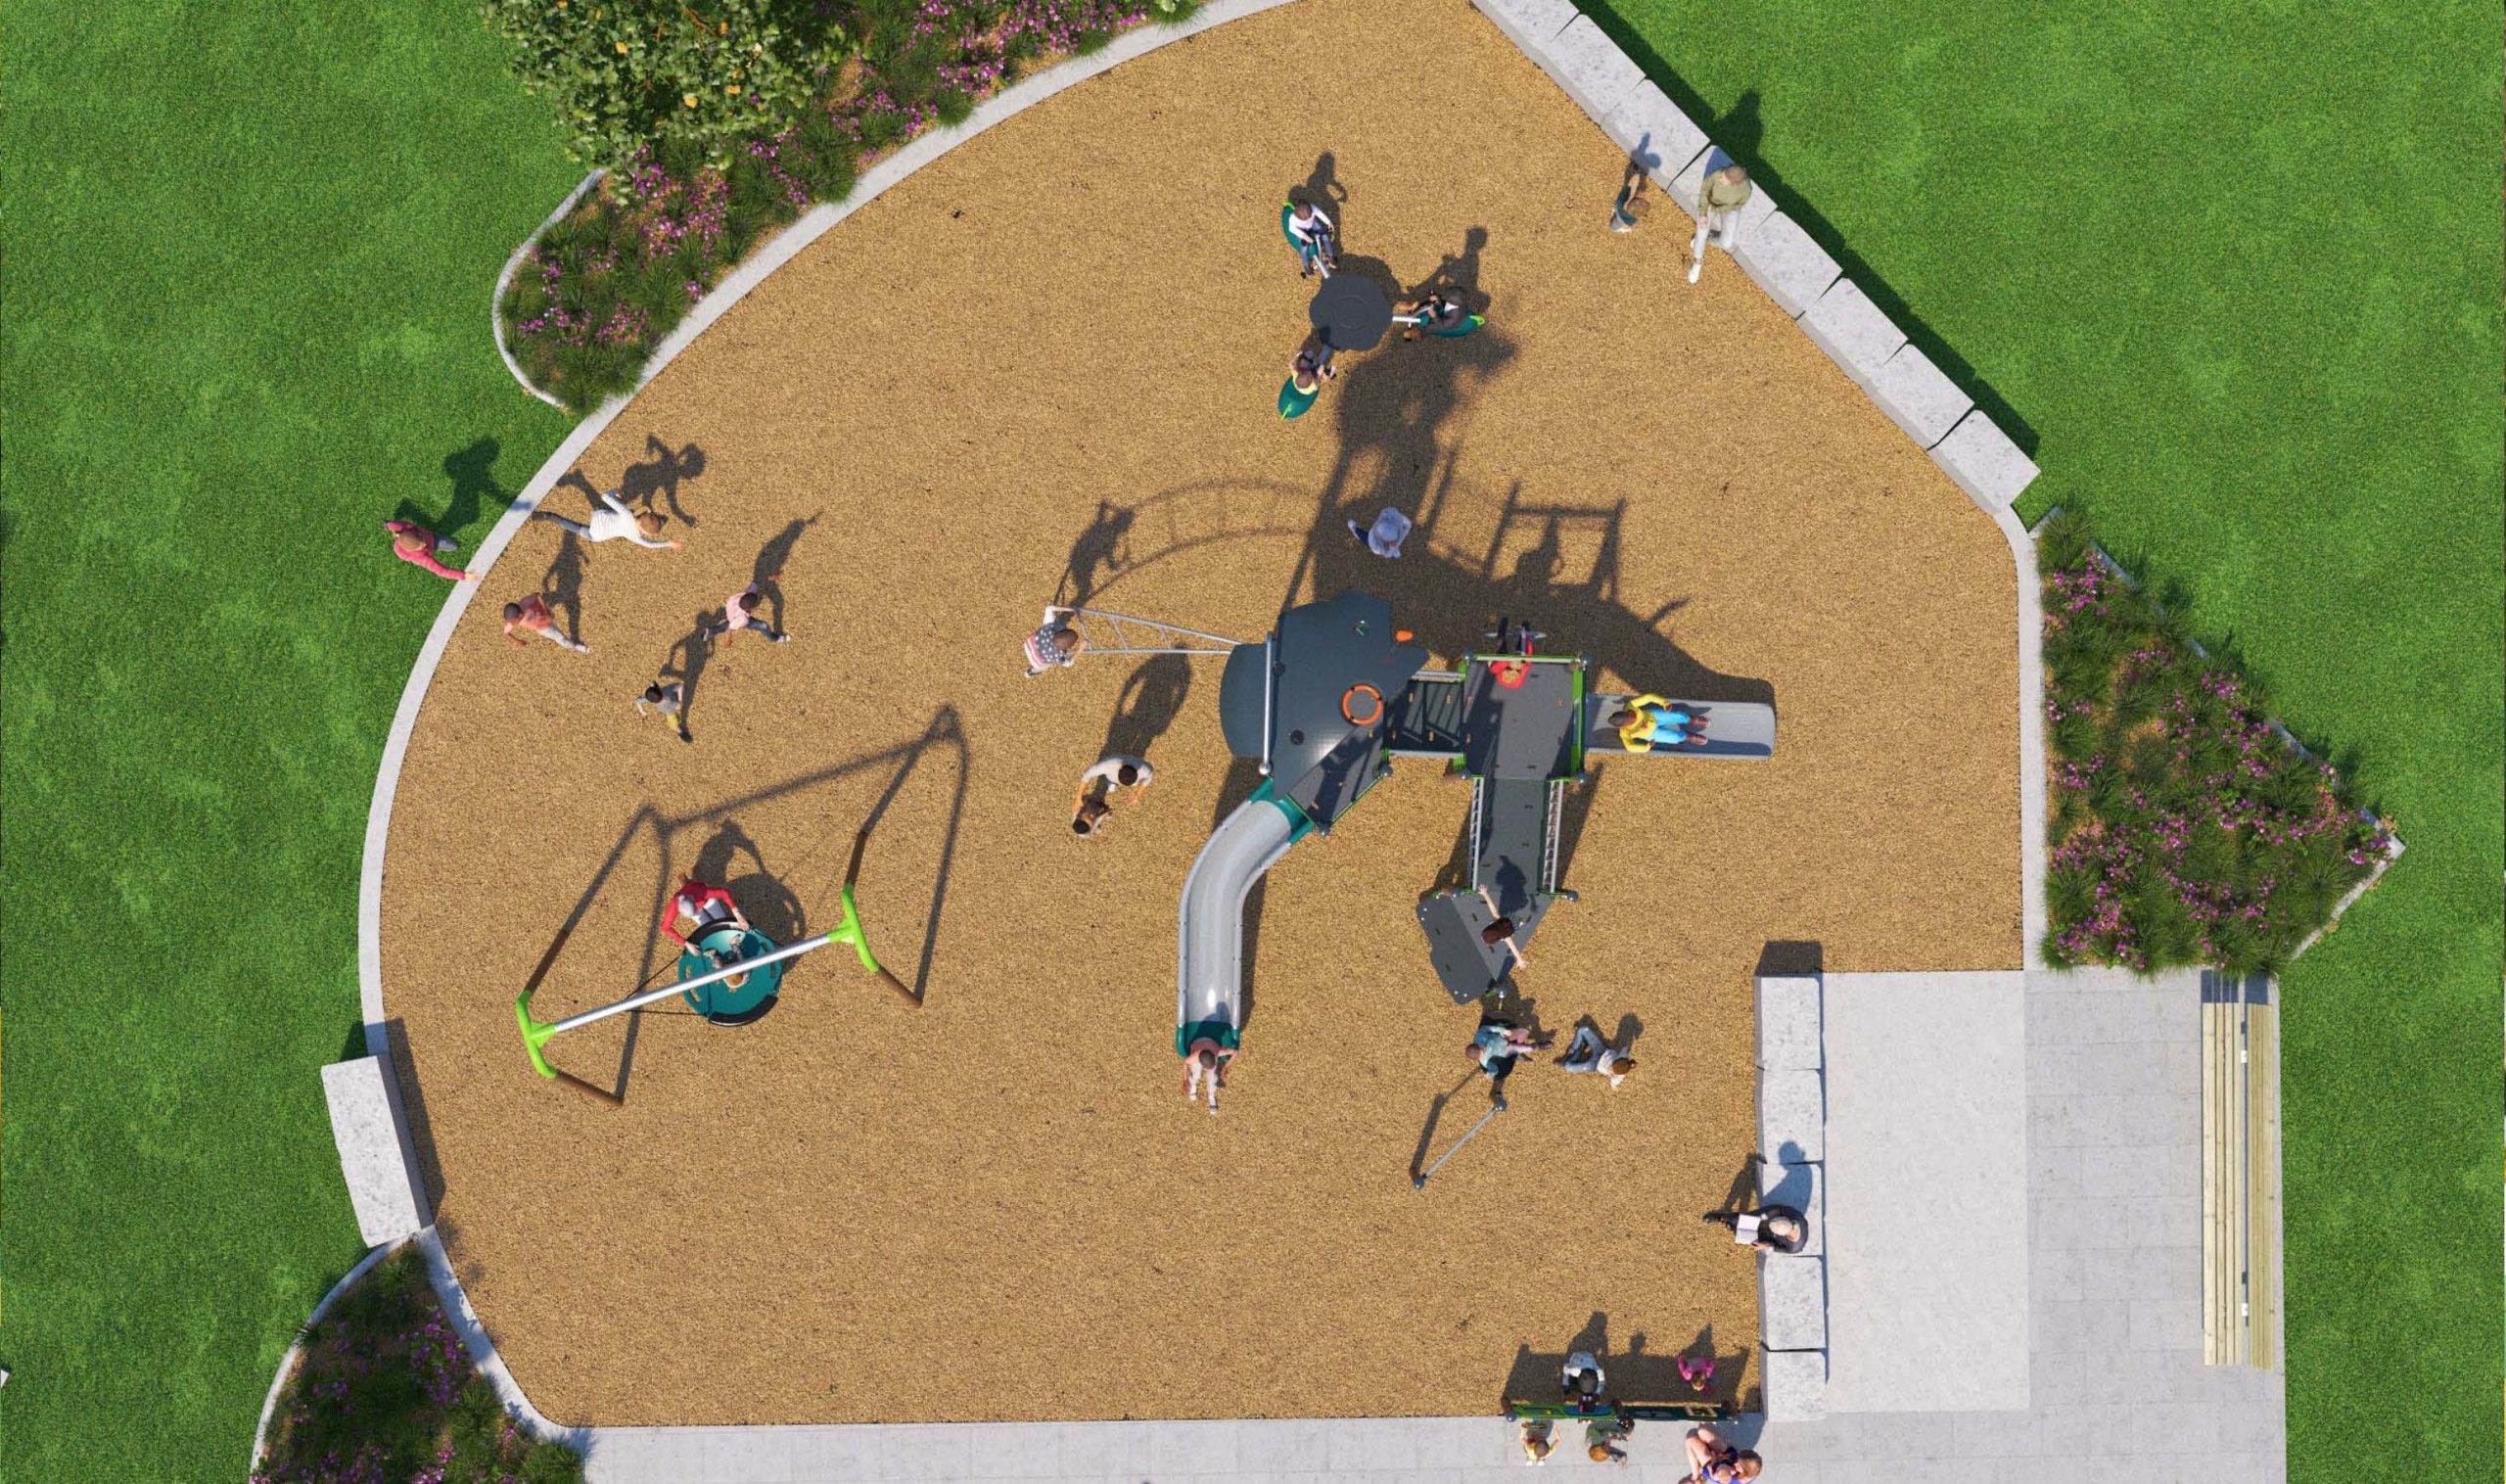 Artistic rendering of playground from aerial or overhead view.